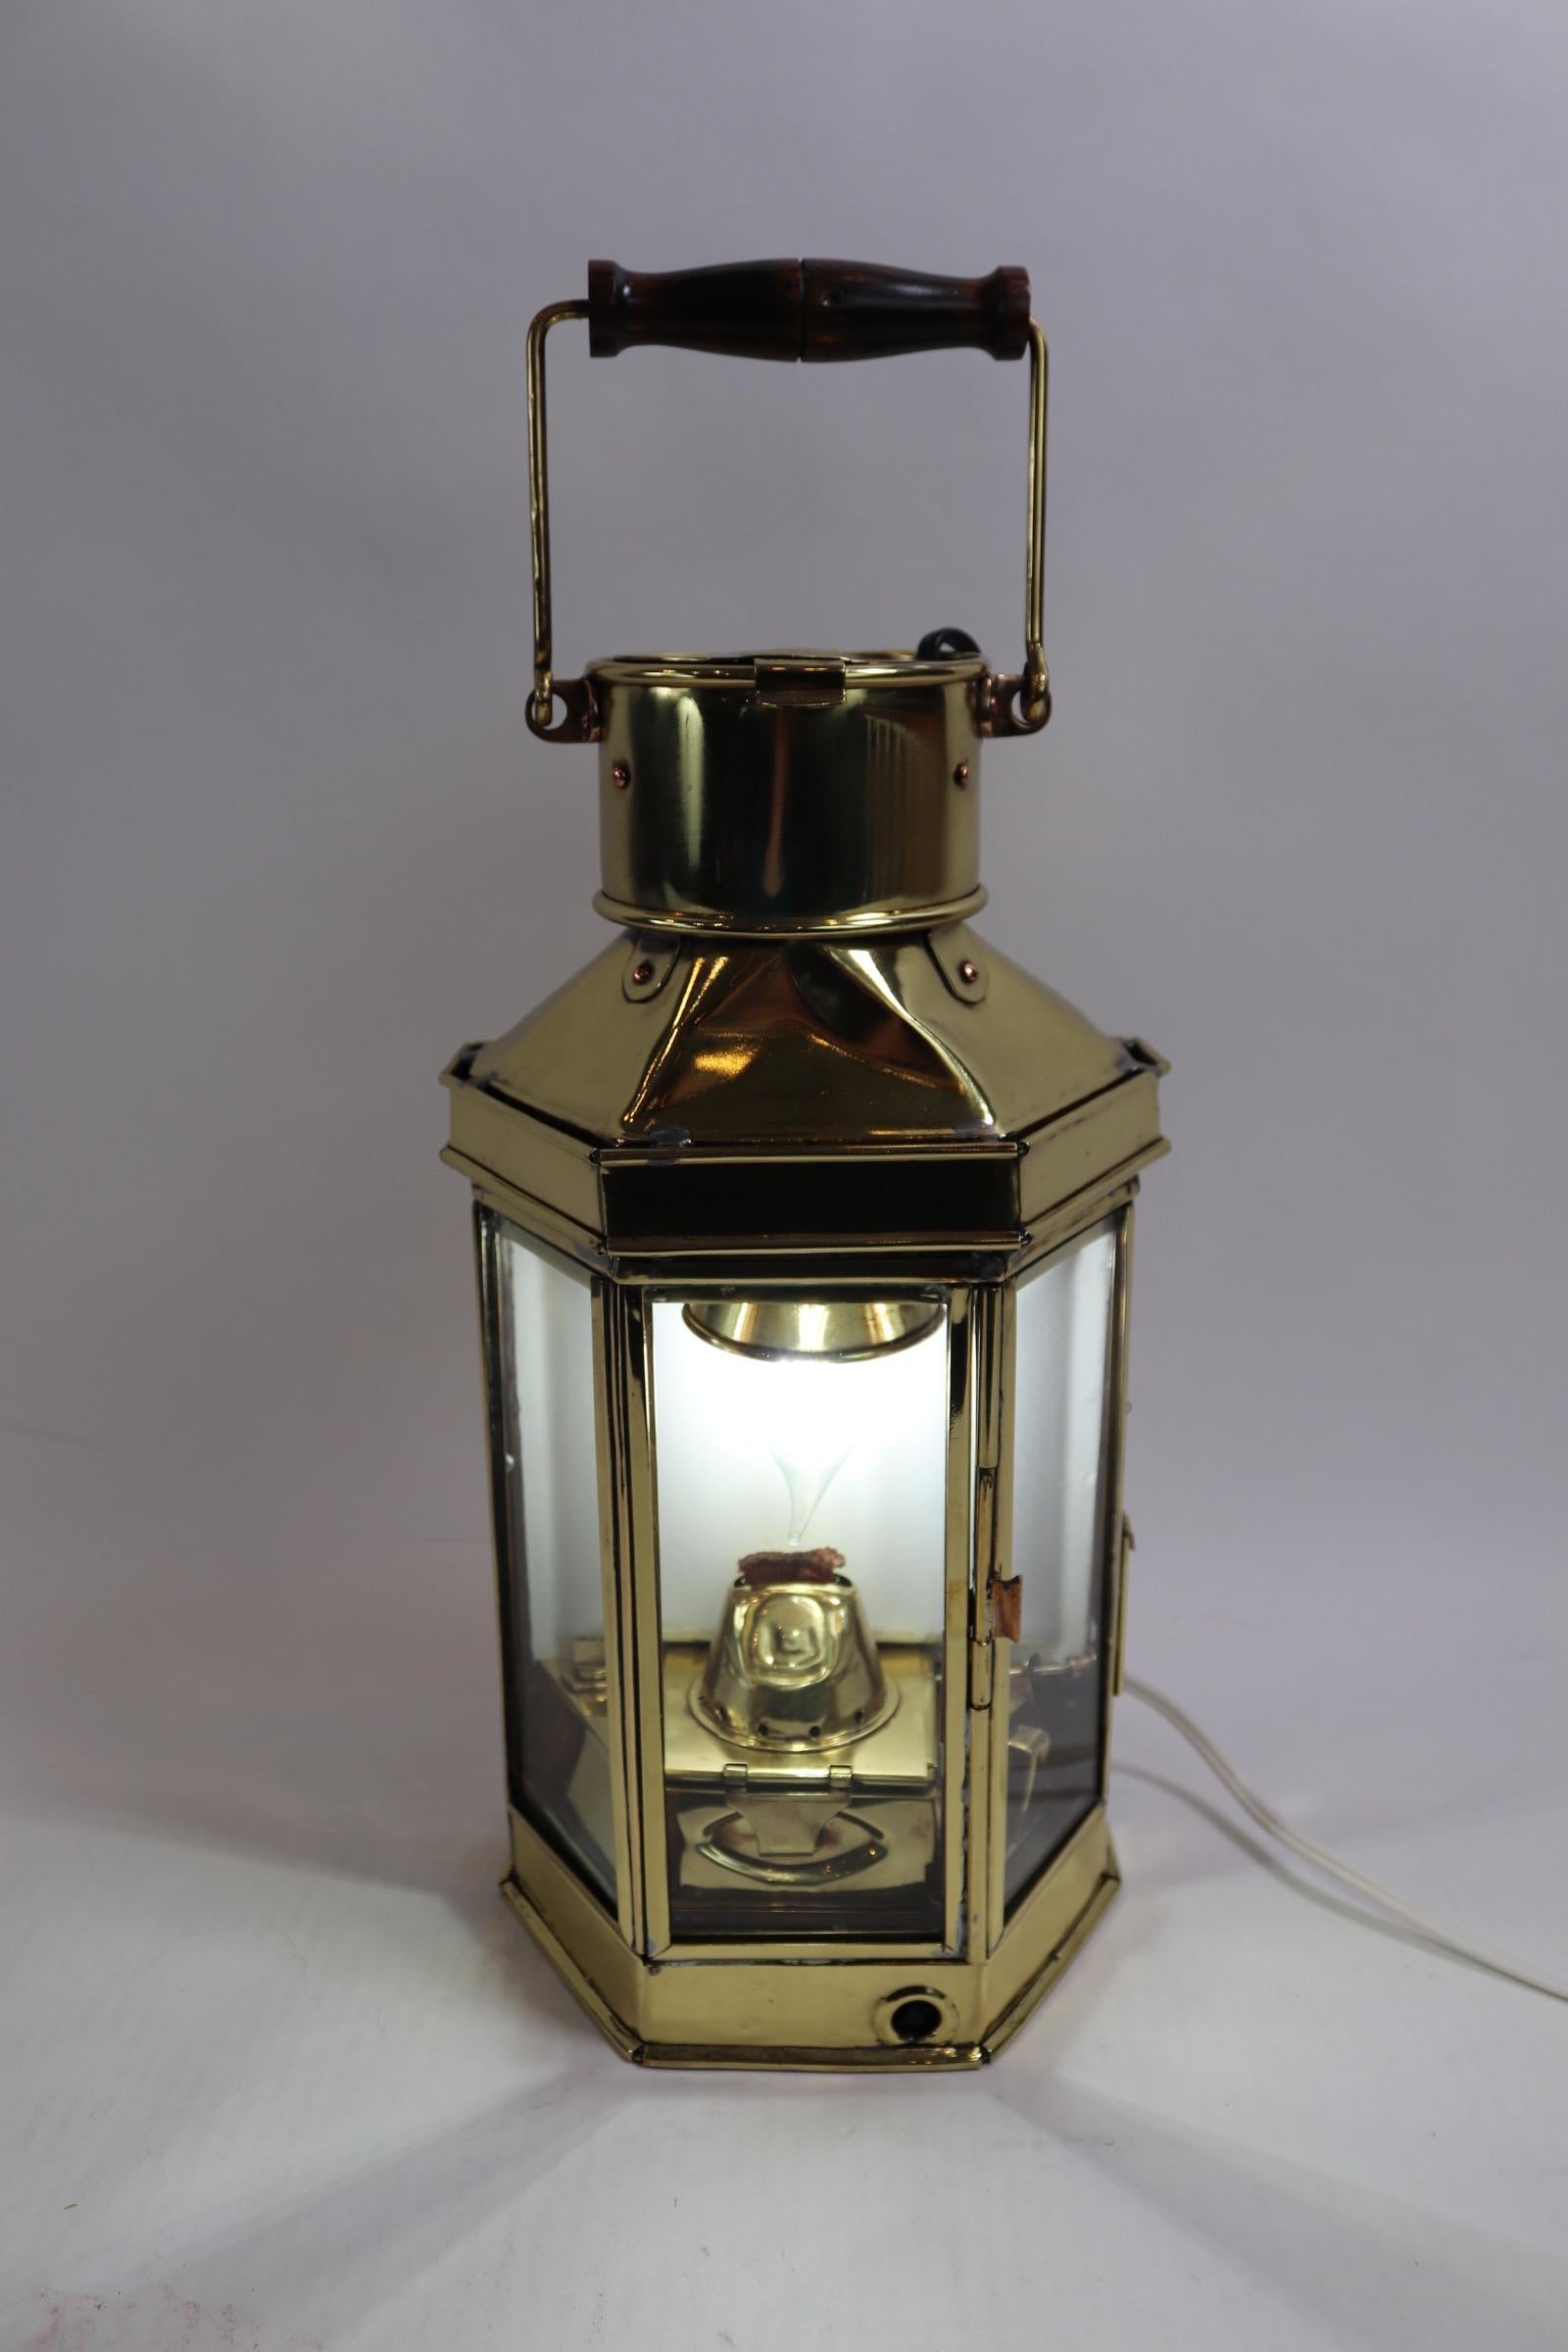 English style solid brass ships cabin lantern impressed with the name of Holder Stroud of Sydney. Also engraved 1941 with a pussers mark. Lantern is fitted with its original burner but has been fitted with an electric socket for home design. Some